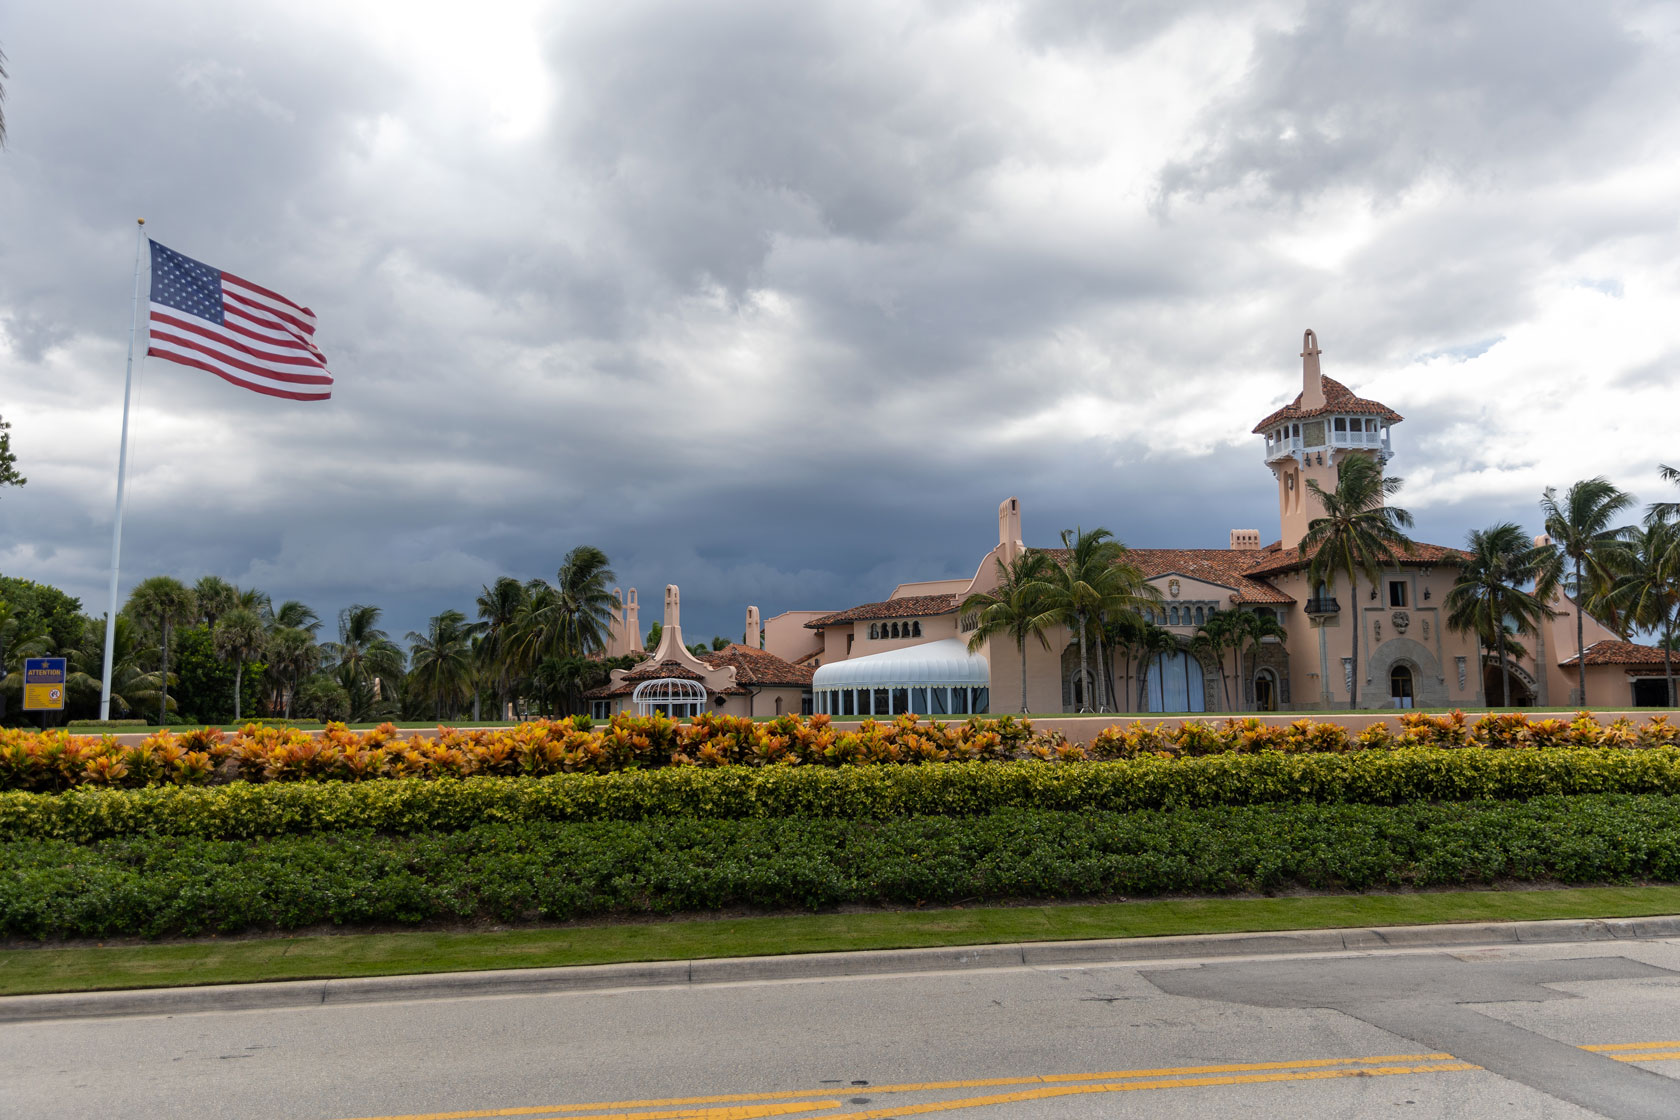 The Mar-a-Lago resort is seen against a stormy gray cloud with an American flag in front.